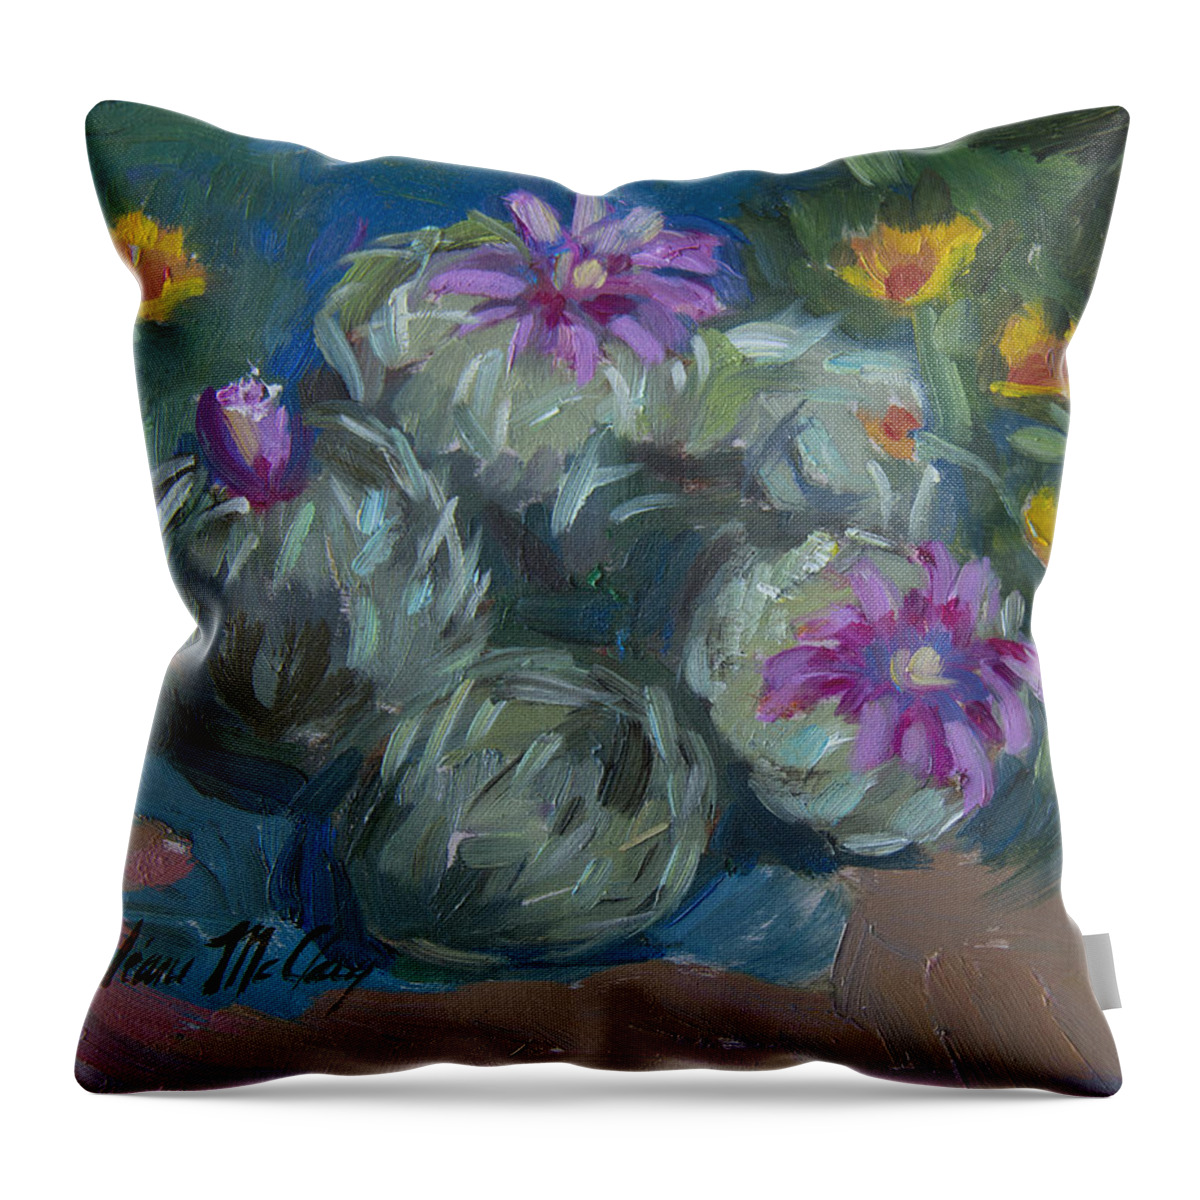 Cactus Throw Pillow featuring the painting Pin Cushion Cactus at Boyce Thompson Arboretum by Diane McClary